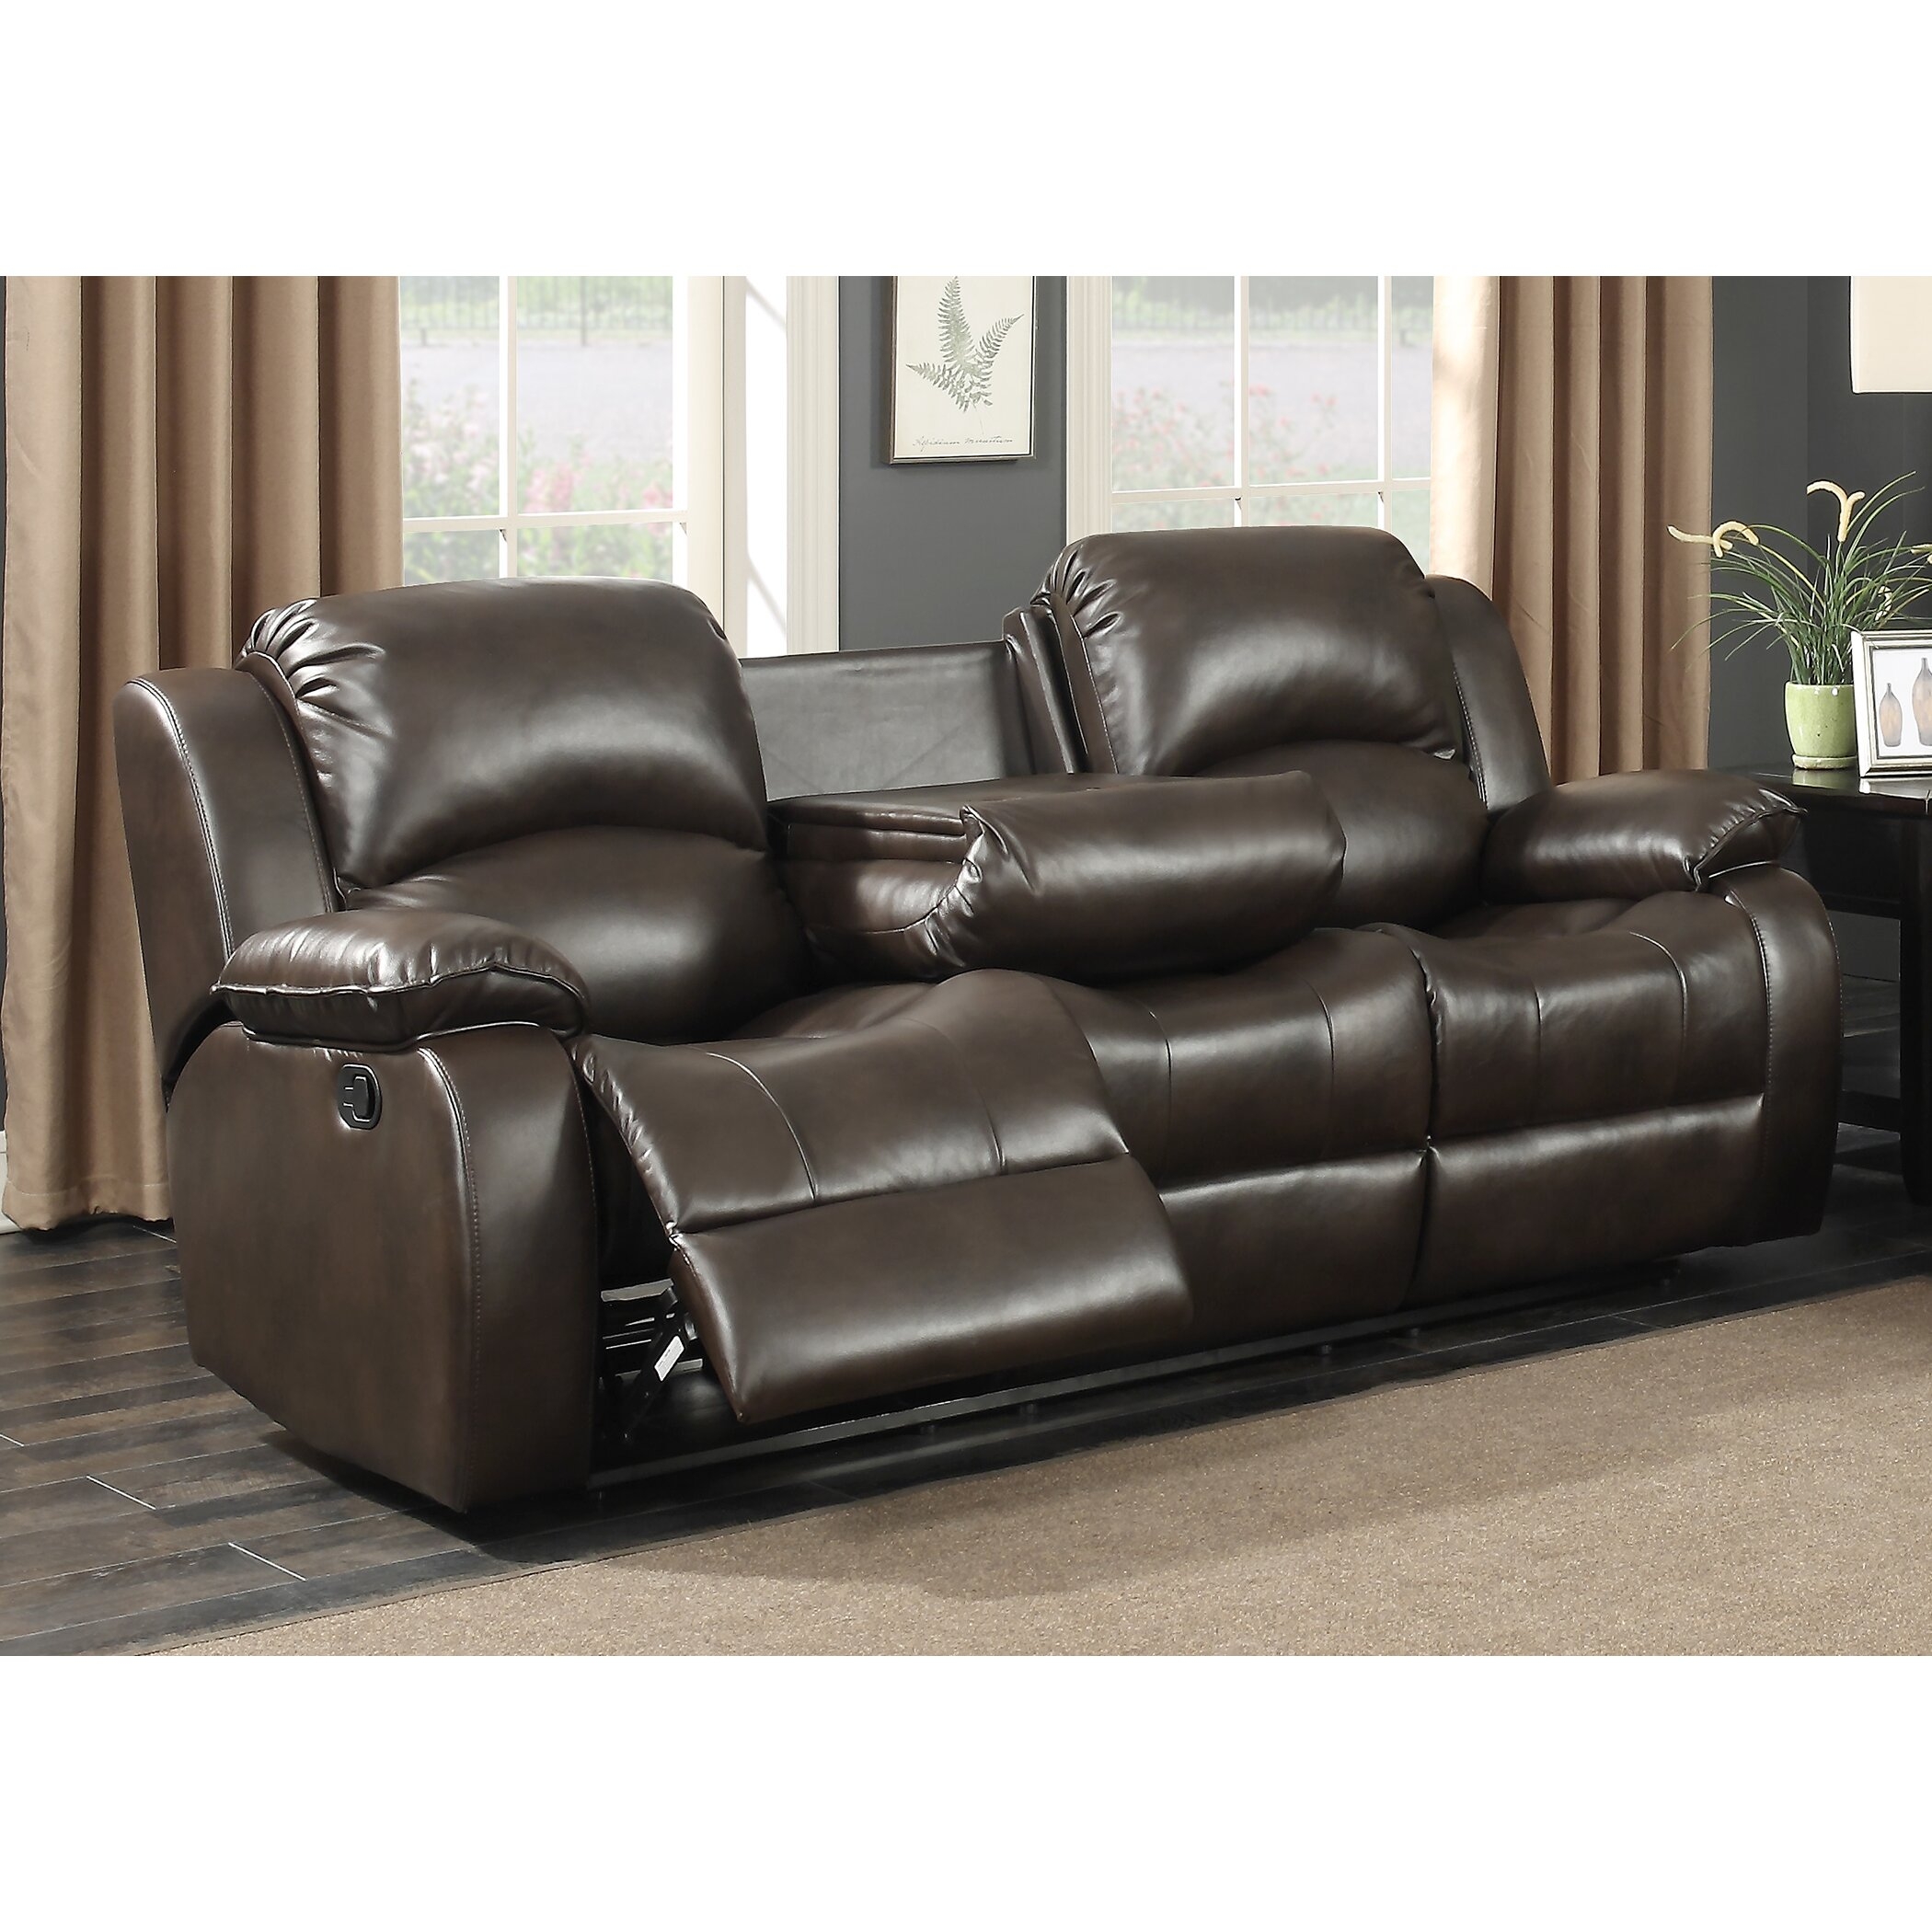 Roosevelt Dual Reclining Sofa Drop Down Console Review | Baci Living Room